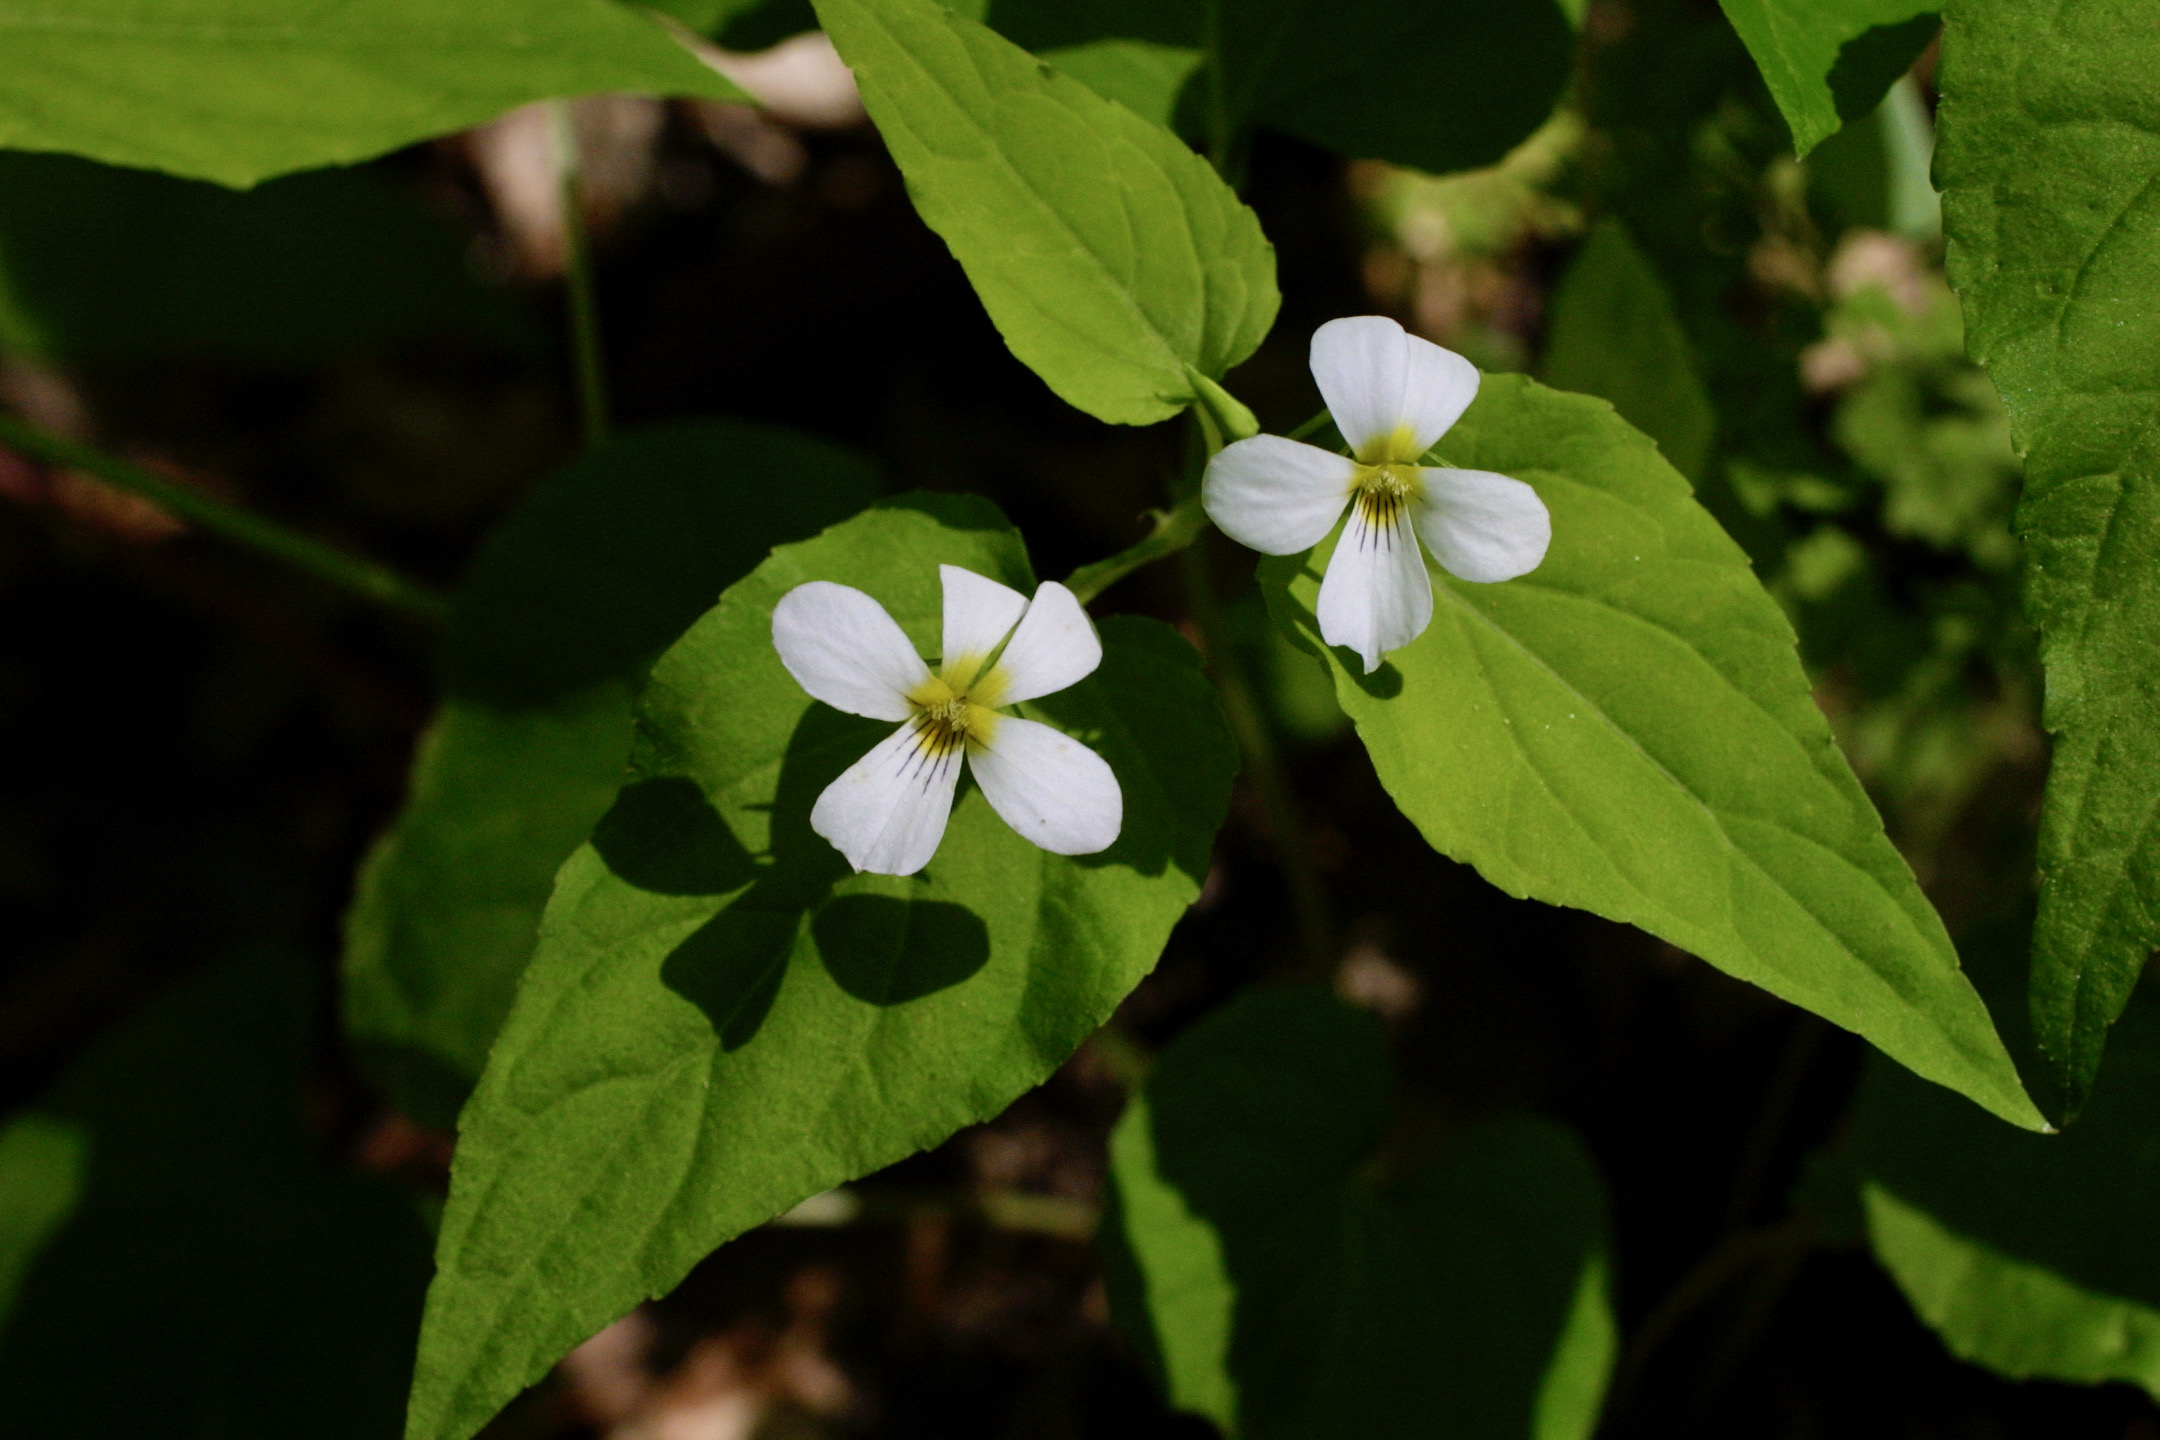 The Scientific Name is Viola canadensis [=Viola canadensis var. canadensis]. You will likely hear them called Tall White Violet, Canada Violet. This picture shows the Bright white flowers with purple stripes on lower petal of Viola canadensis [=Viola canadensis var. canadensis]